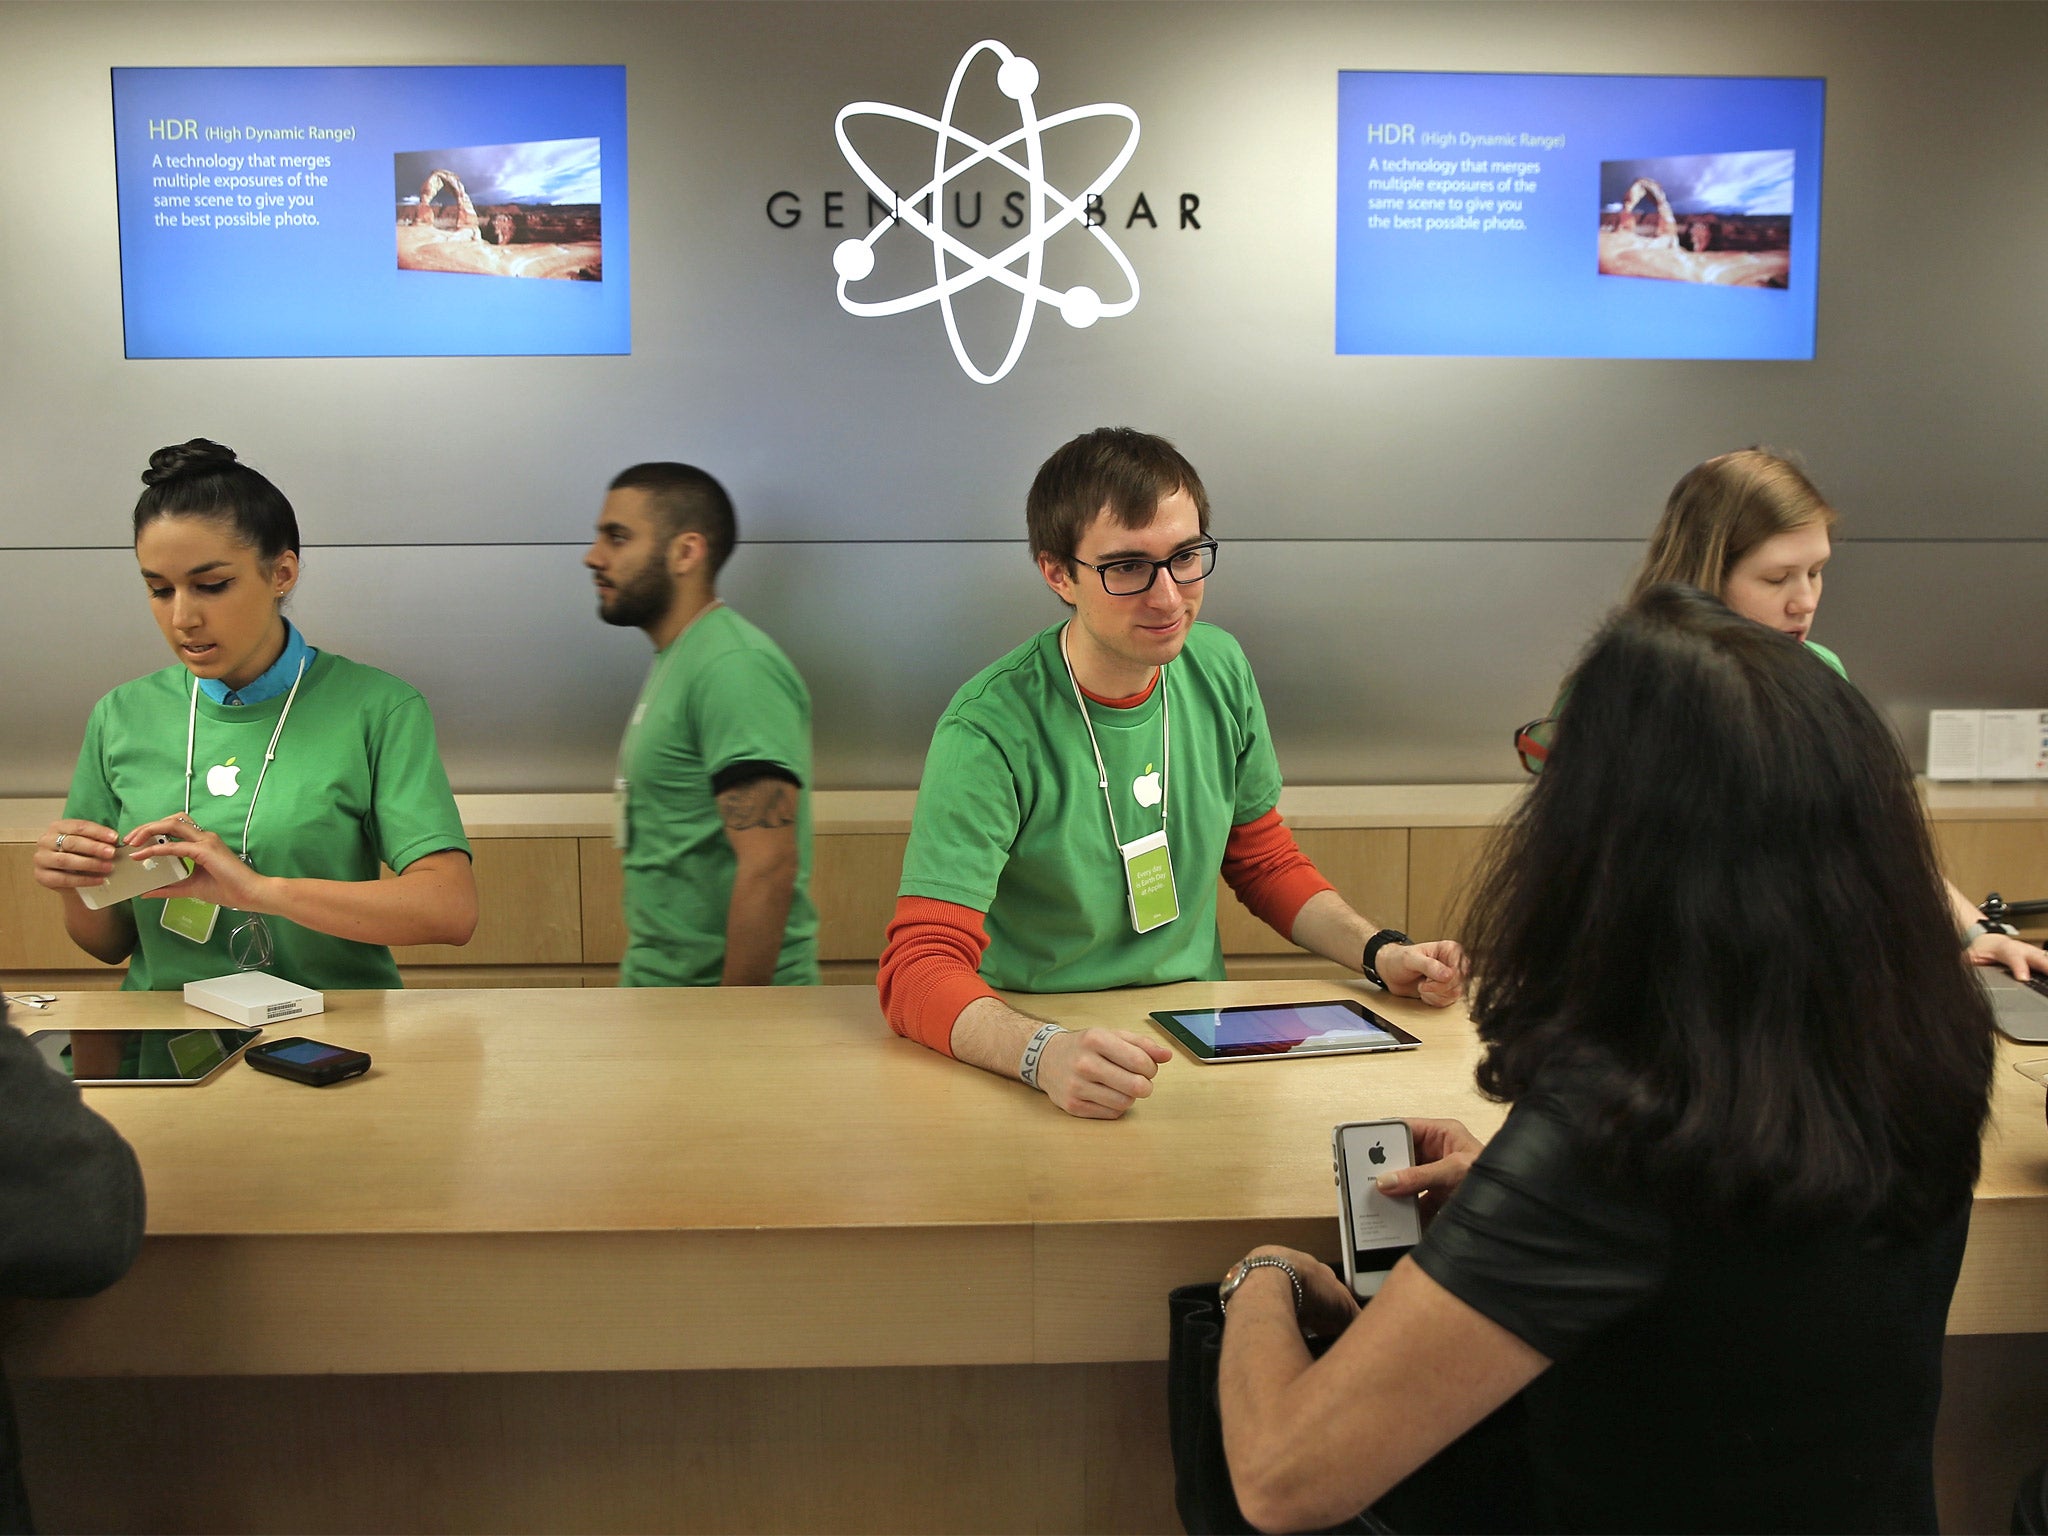 Apple’s star has fallen with consumers as its once renowned customer service slips